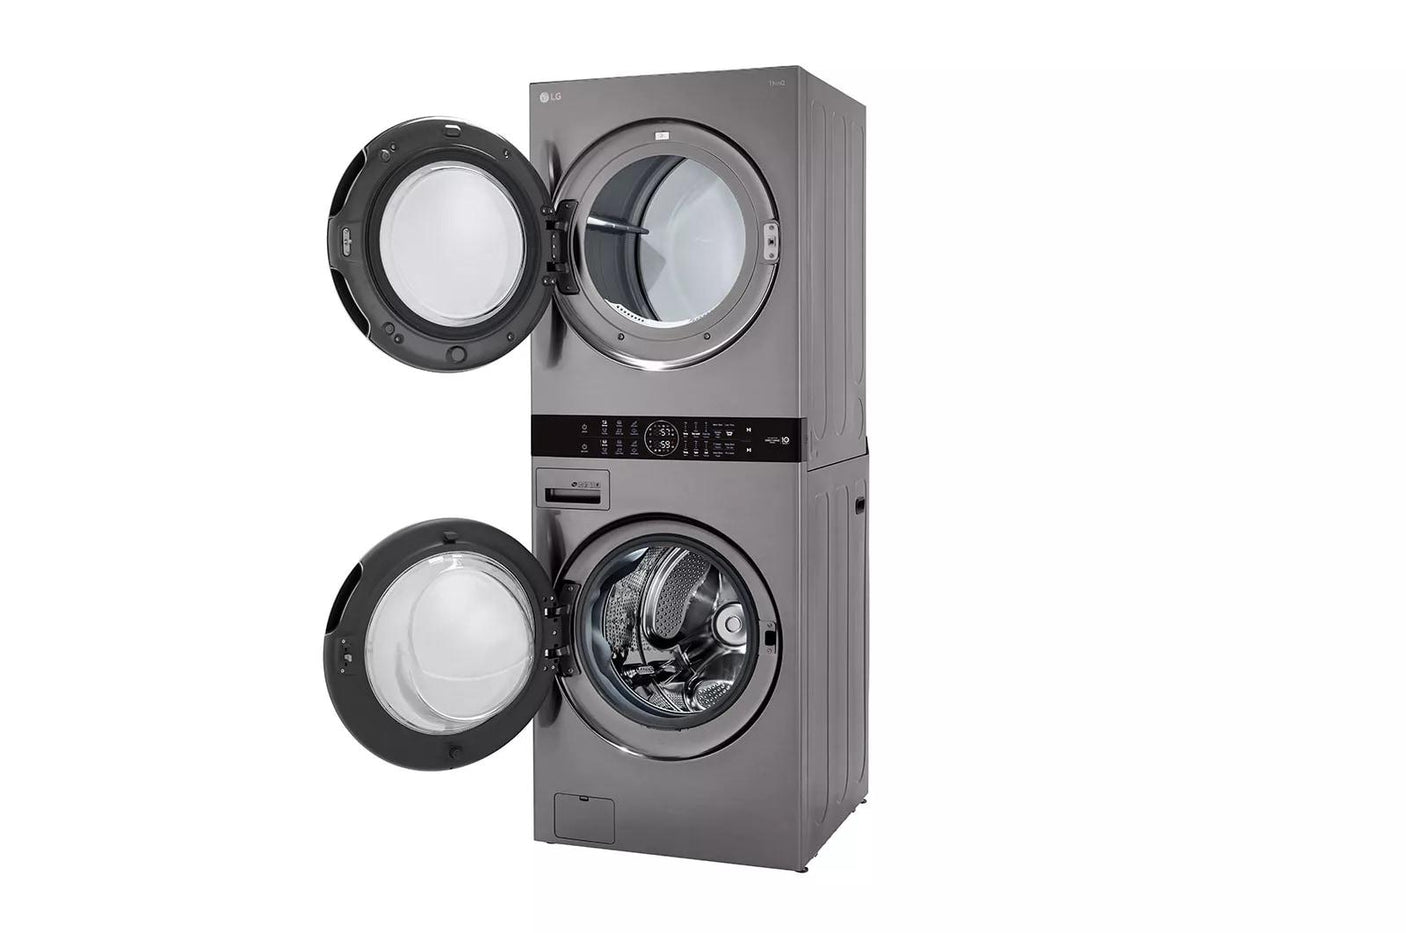 Single Unit Front Load LG WashTower™ with Center Control™ 4.5 cu. ft. Washer and 7.4 cu. ft. Electric Dryer